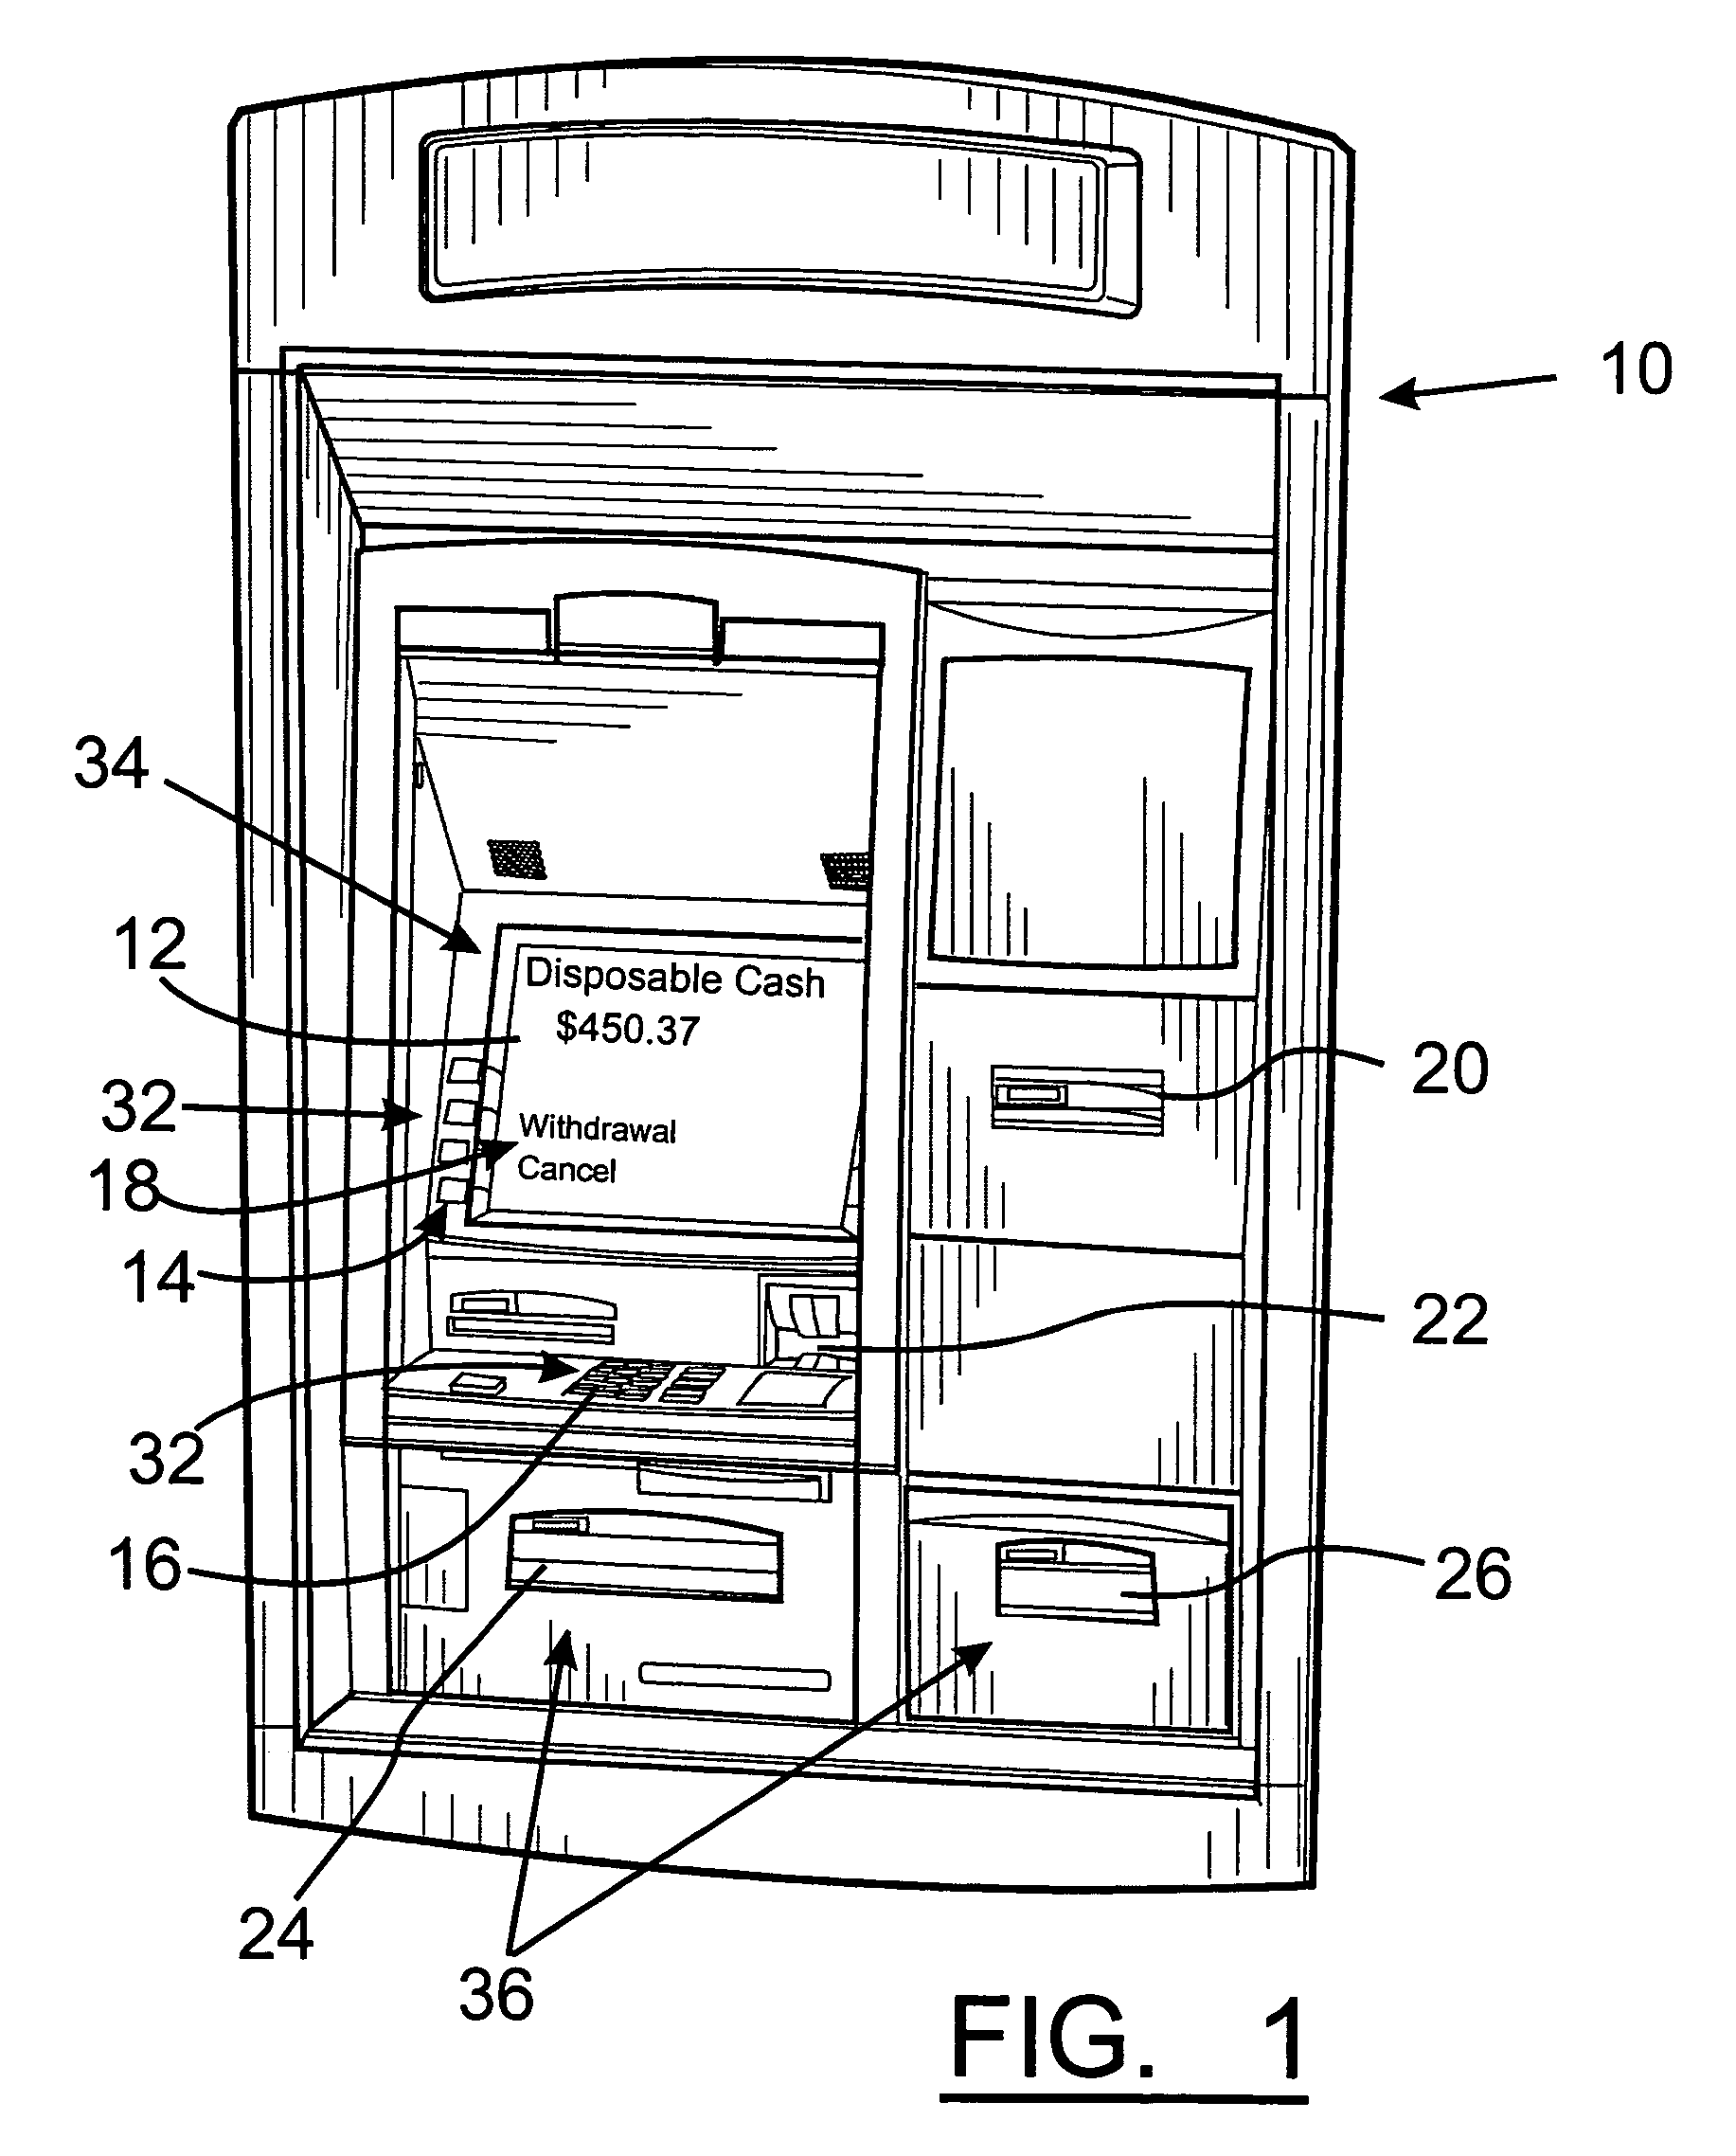 Cash dispensing automated banking machine with disposable cash display